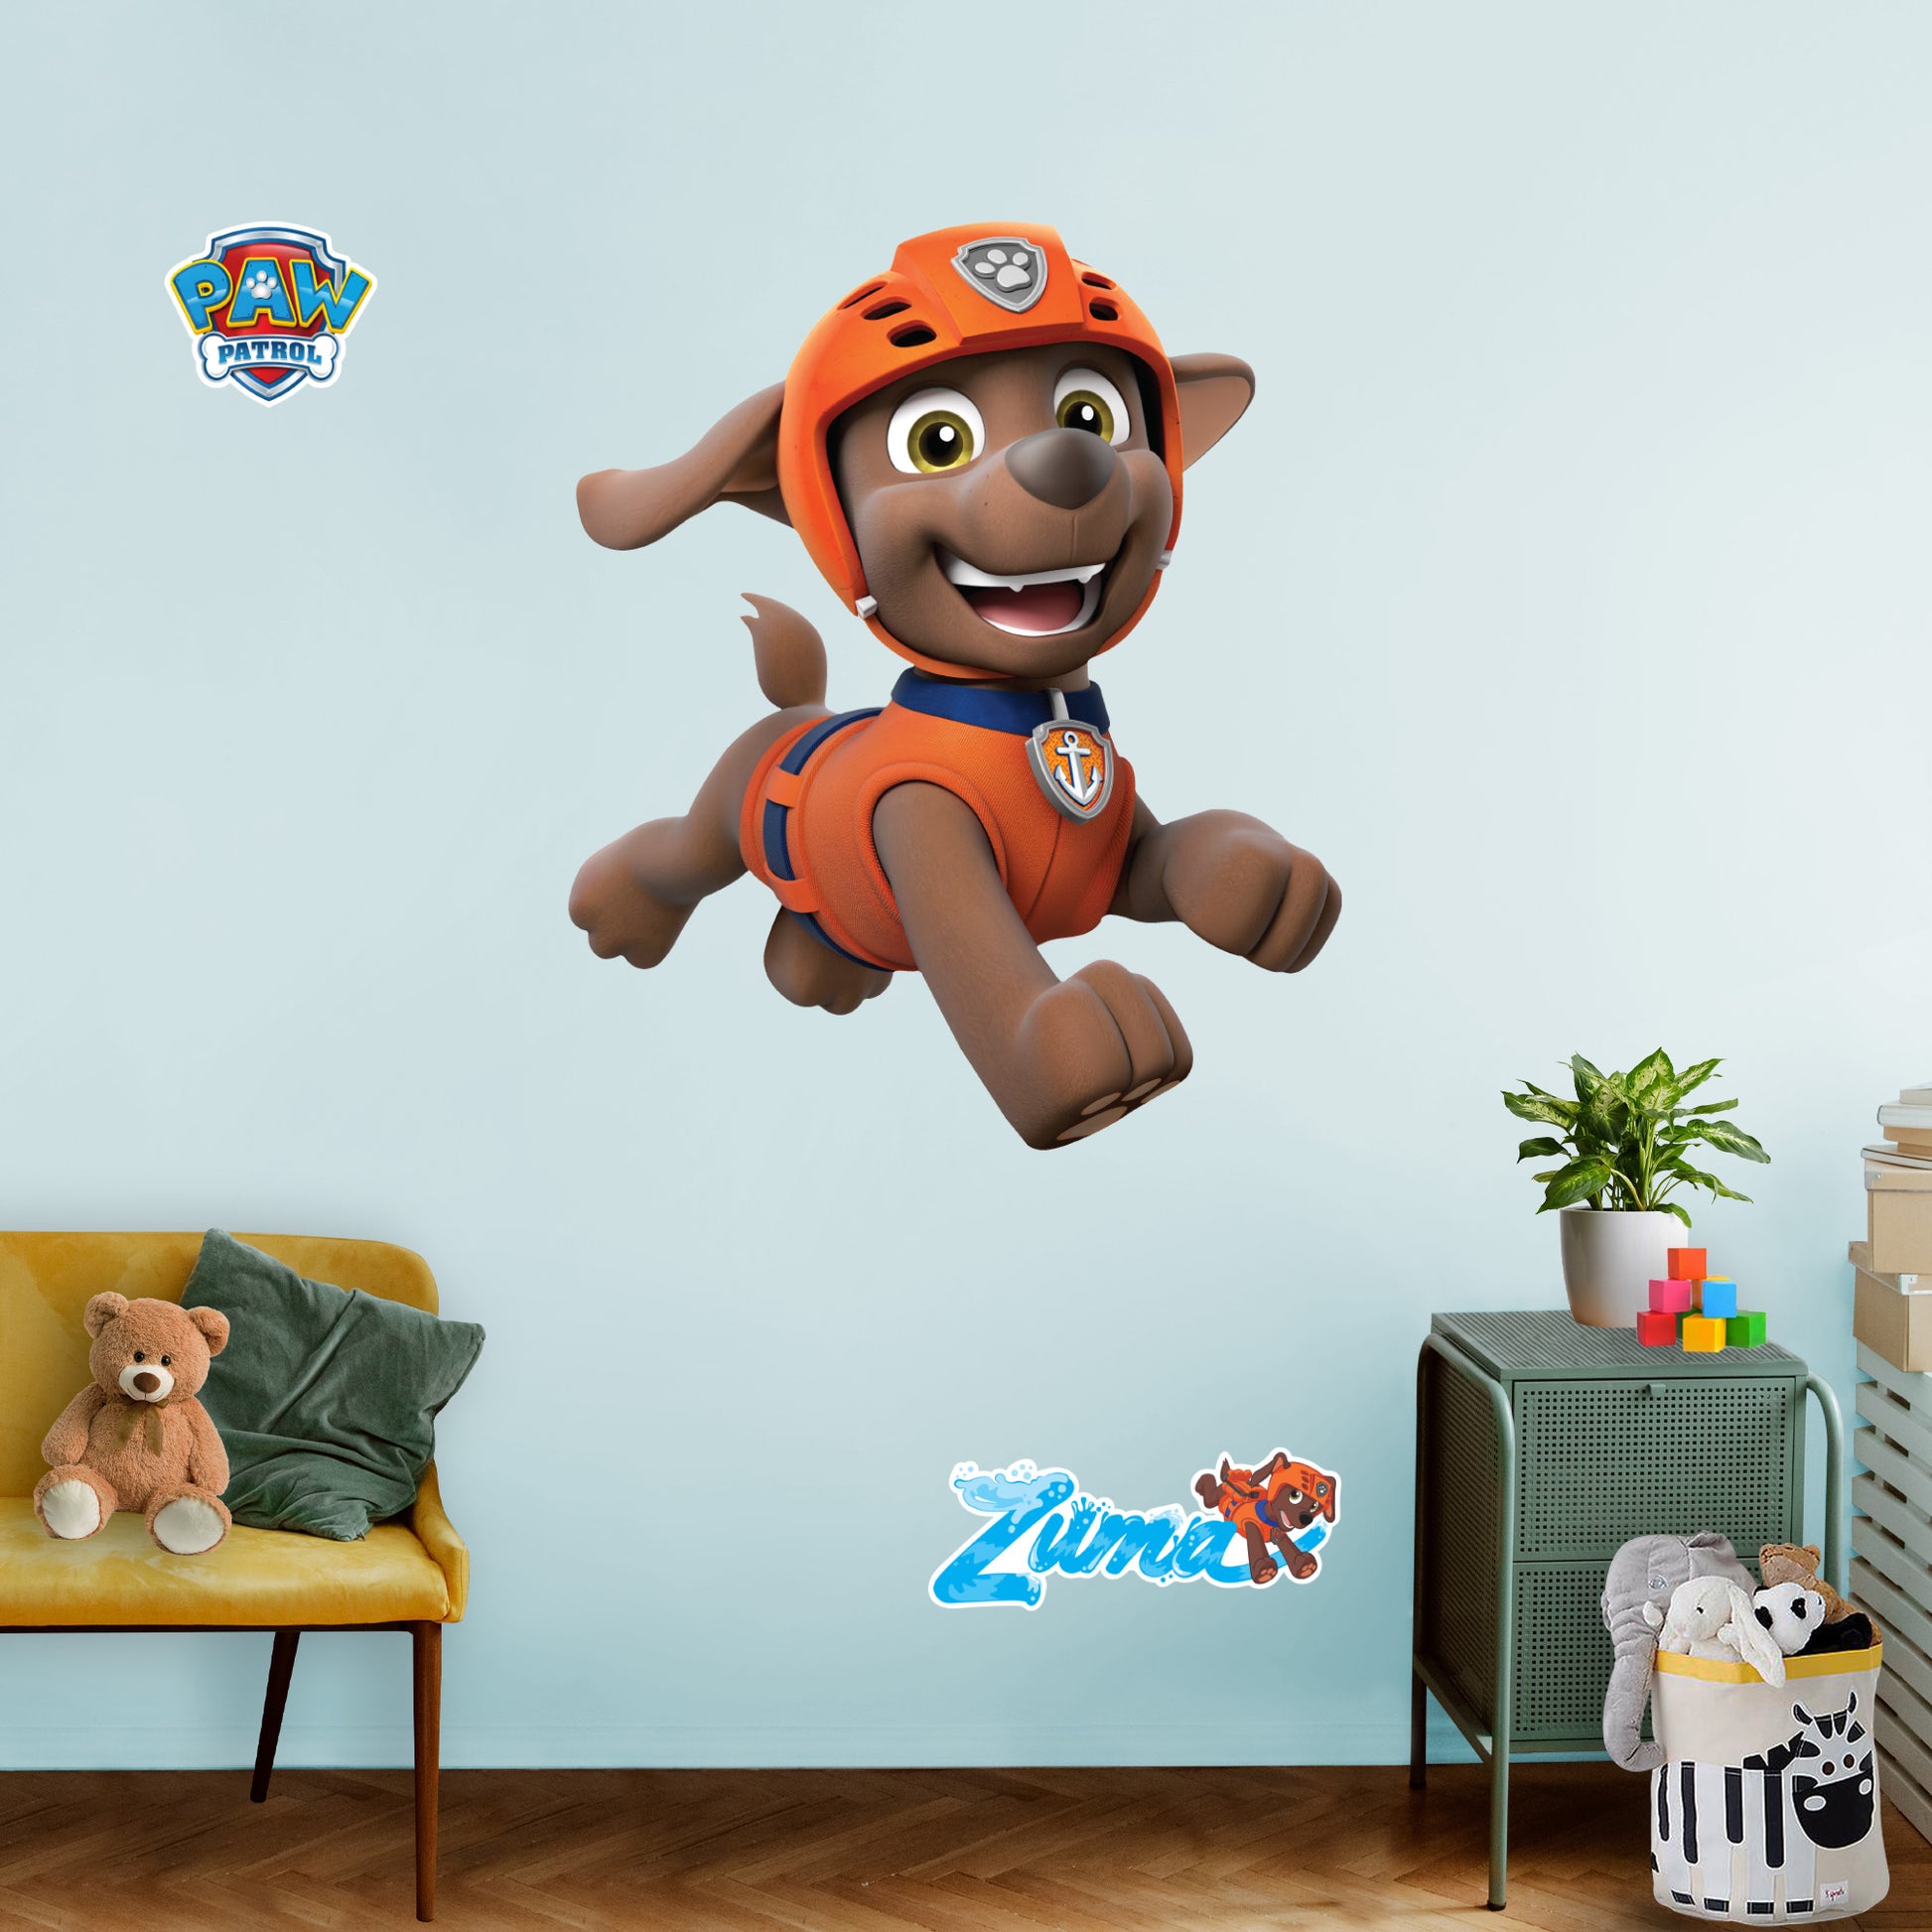 Paw Patrol: Zuma Vehicle RealBig - Officially Licensed Nickelodeon  Removable Adhesive Decal